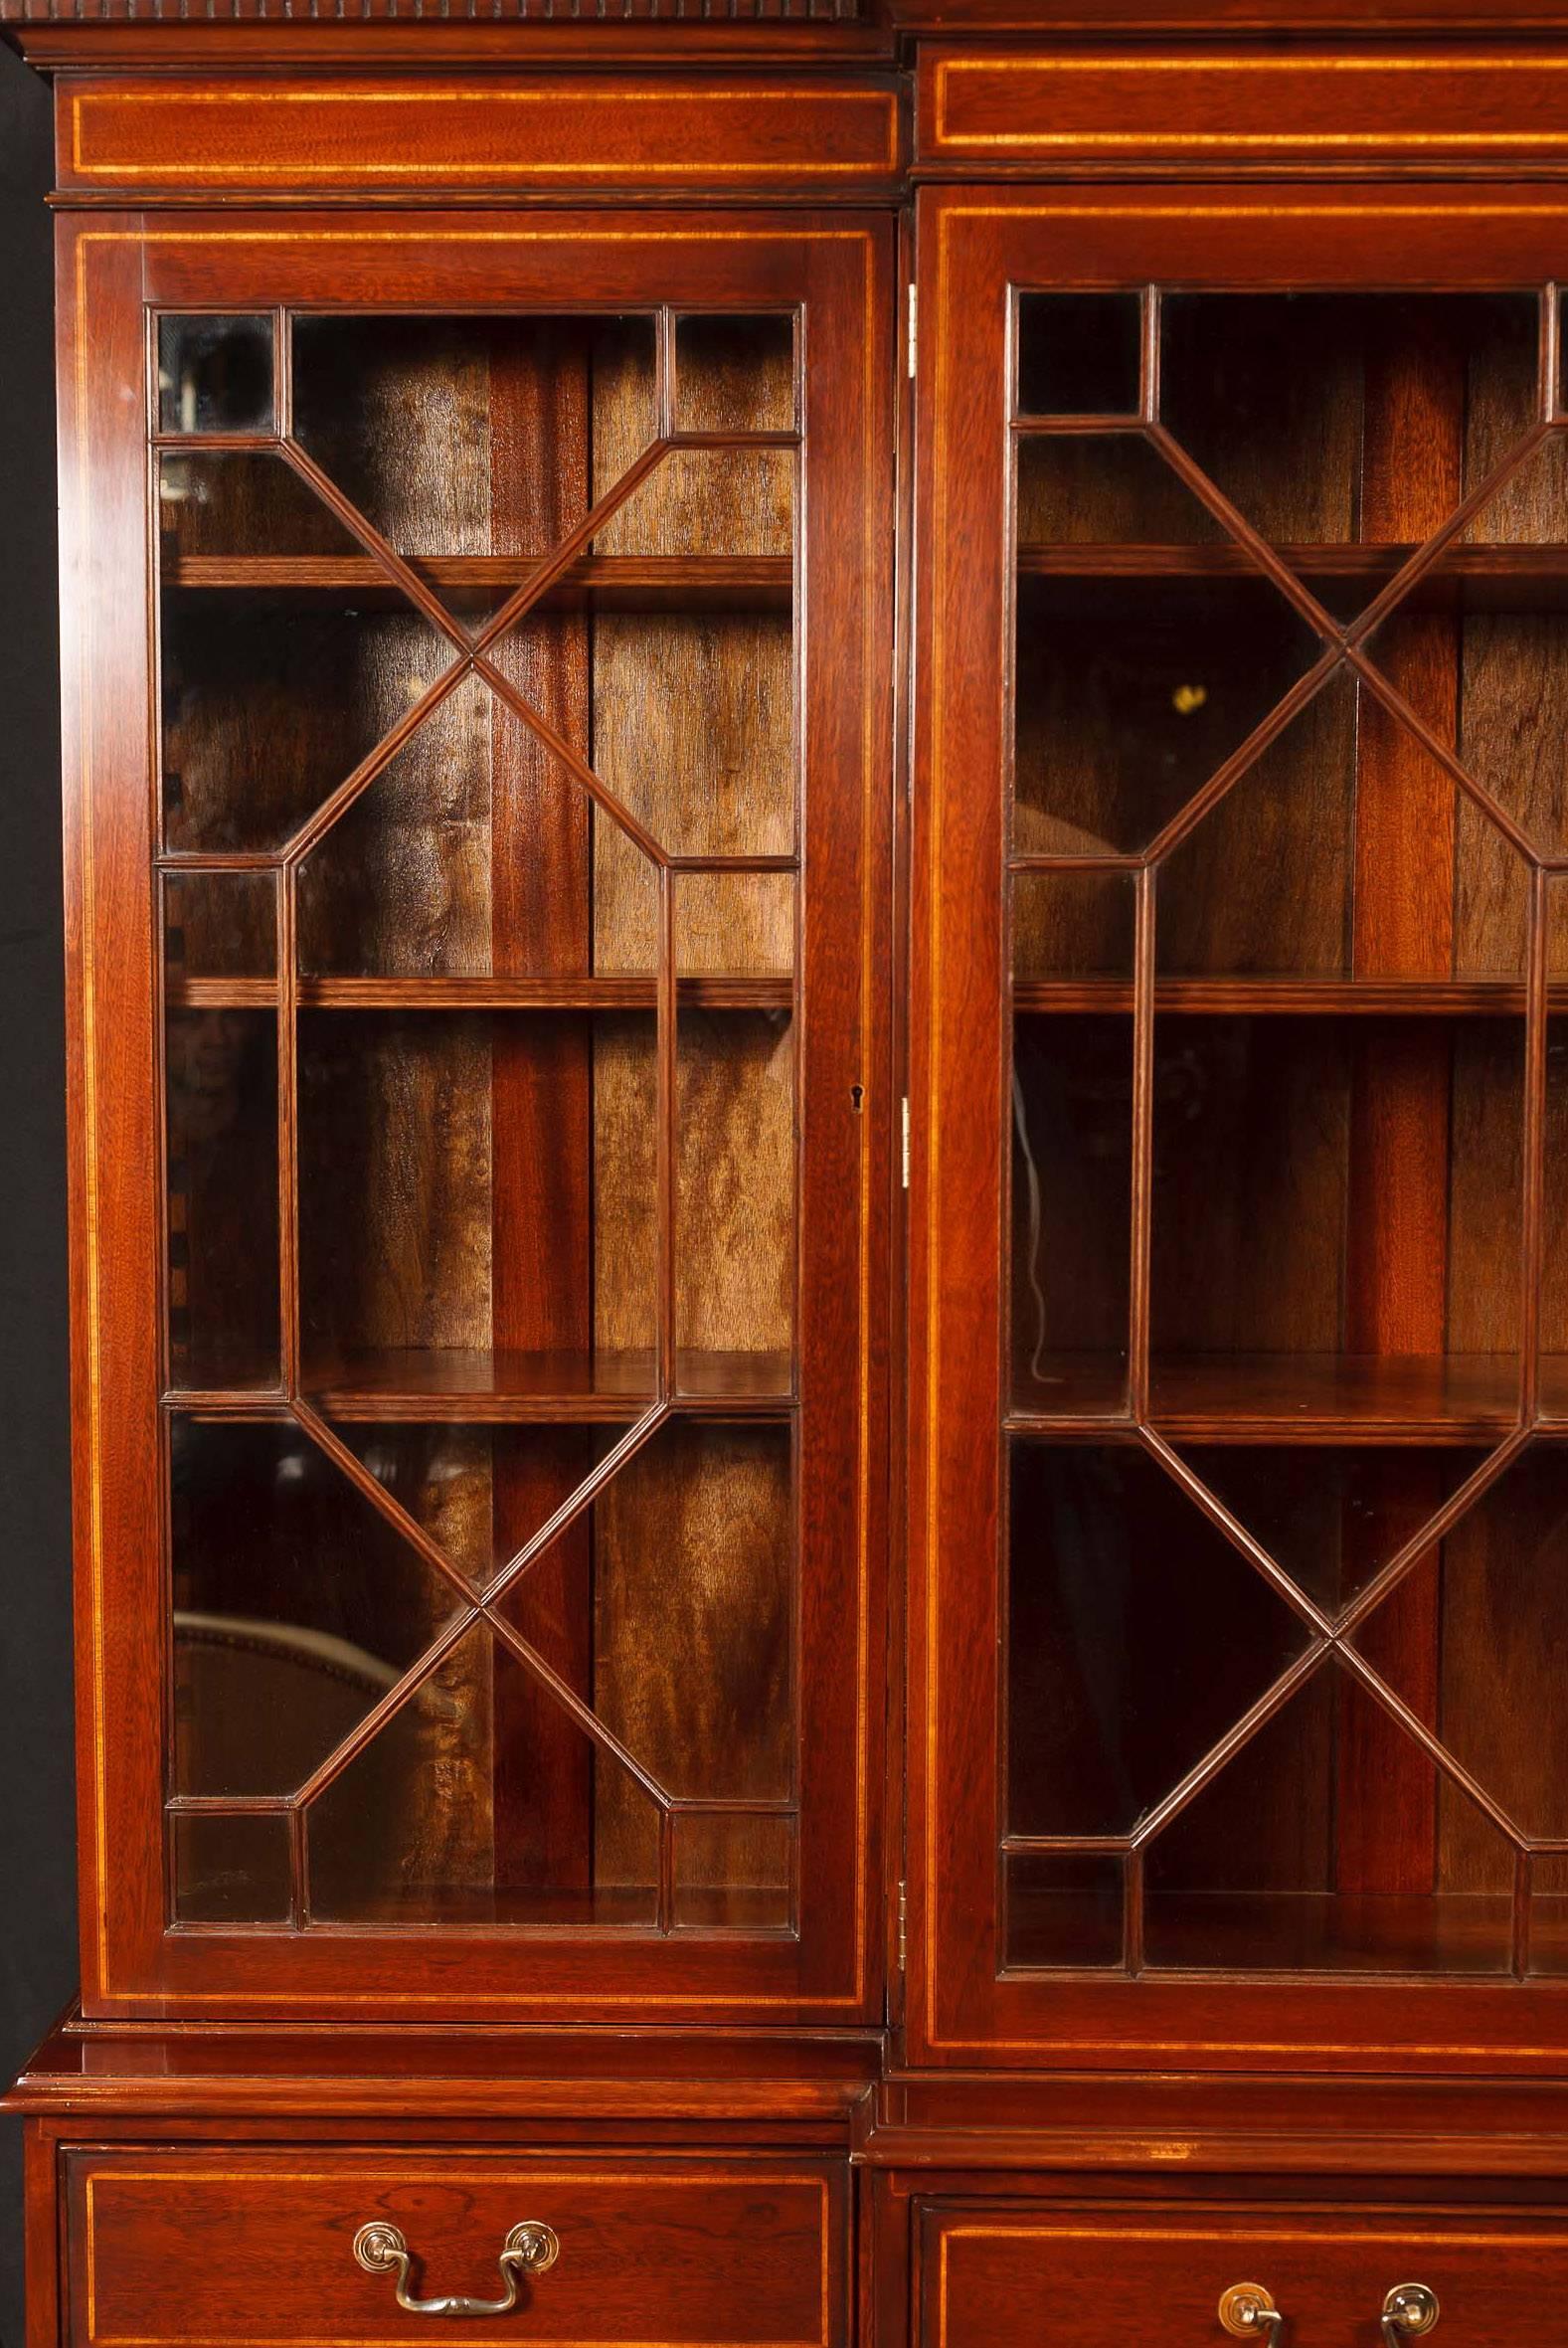 You are viewing a fantastic Sheraton style mahogany breakfront bookcase. The piece comes in two parts, the four door - four drawer base, and the glass fronted top. It's the perfect mix of aesthetic beauty and practical usefulness and will add a